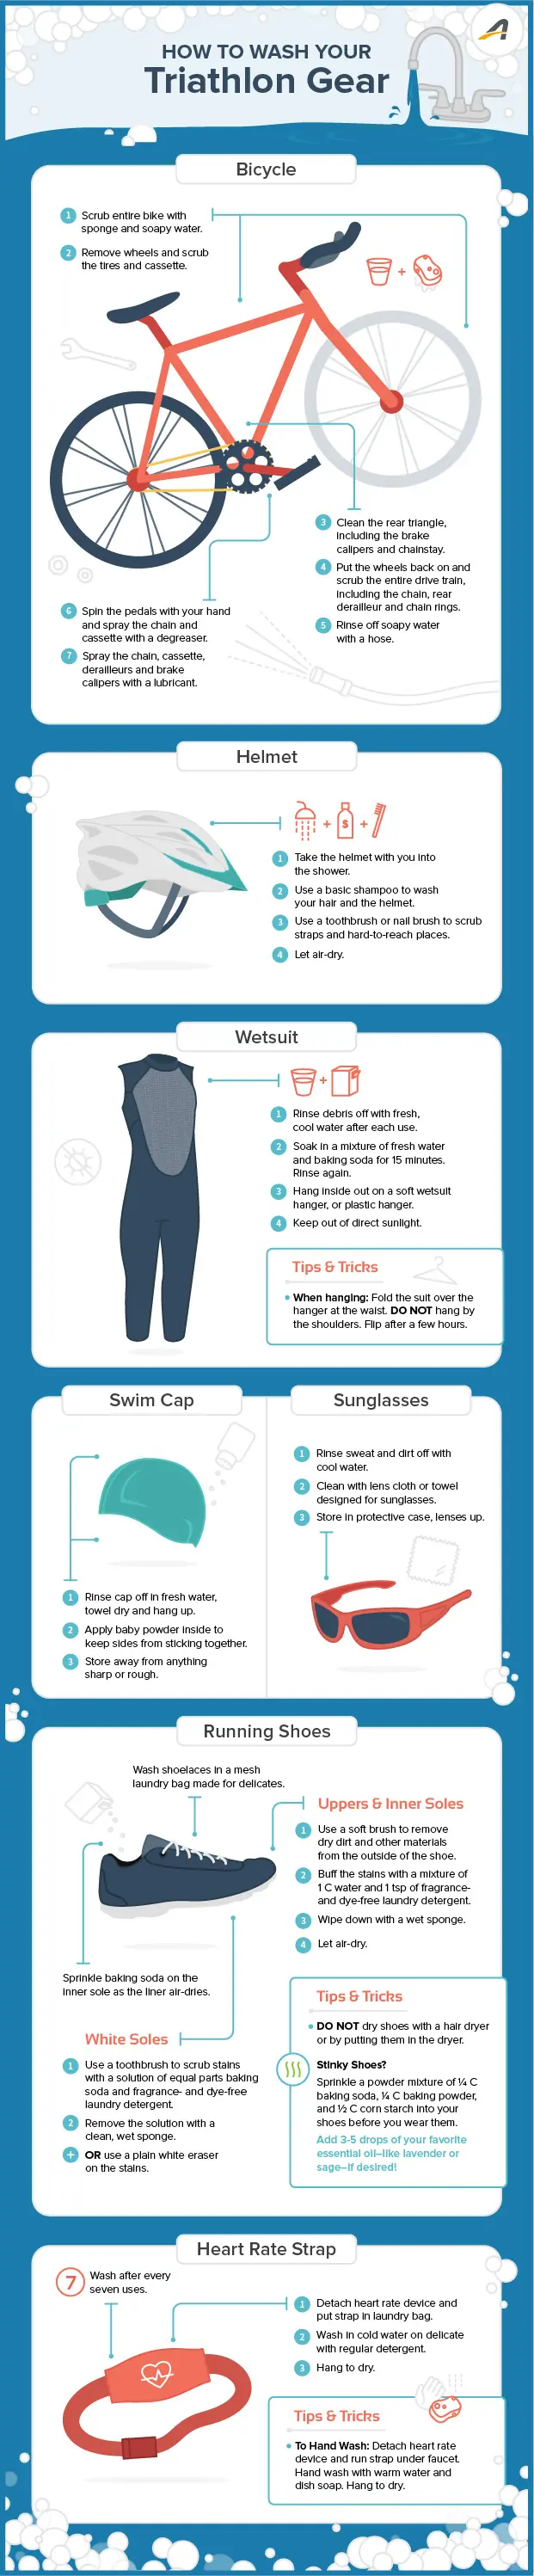 Infographic on how to wash your triathlon gear.